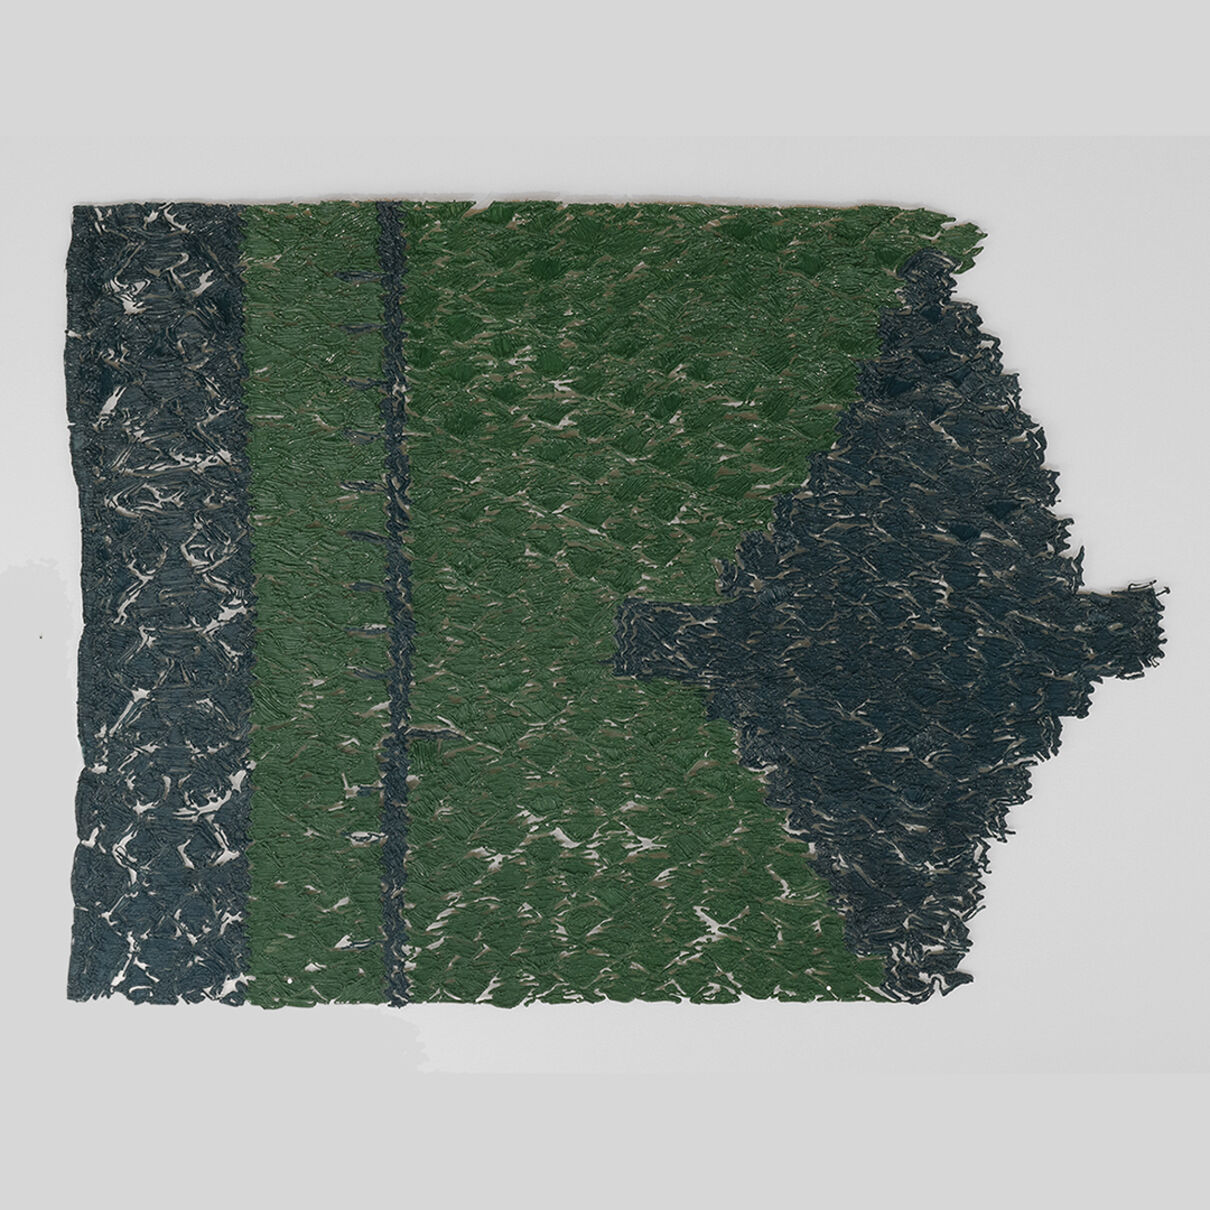 A two-toned fragment of green textile on a grey background